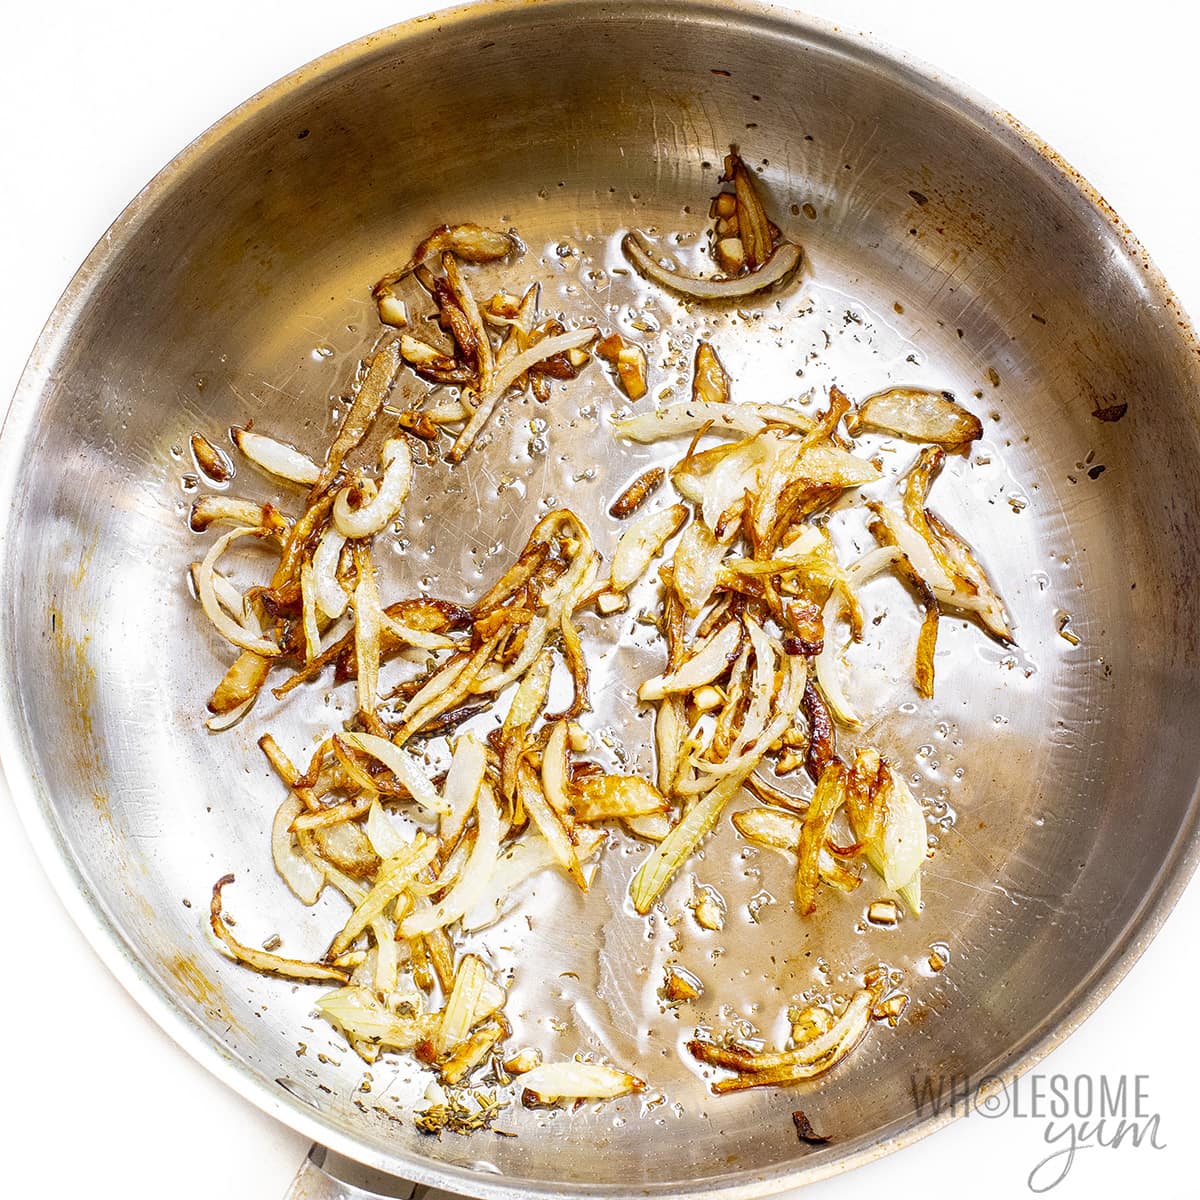 Sauteed onions and garlic in a saute pan.